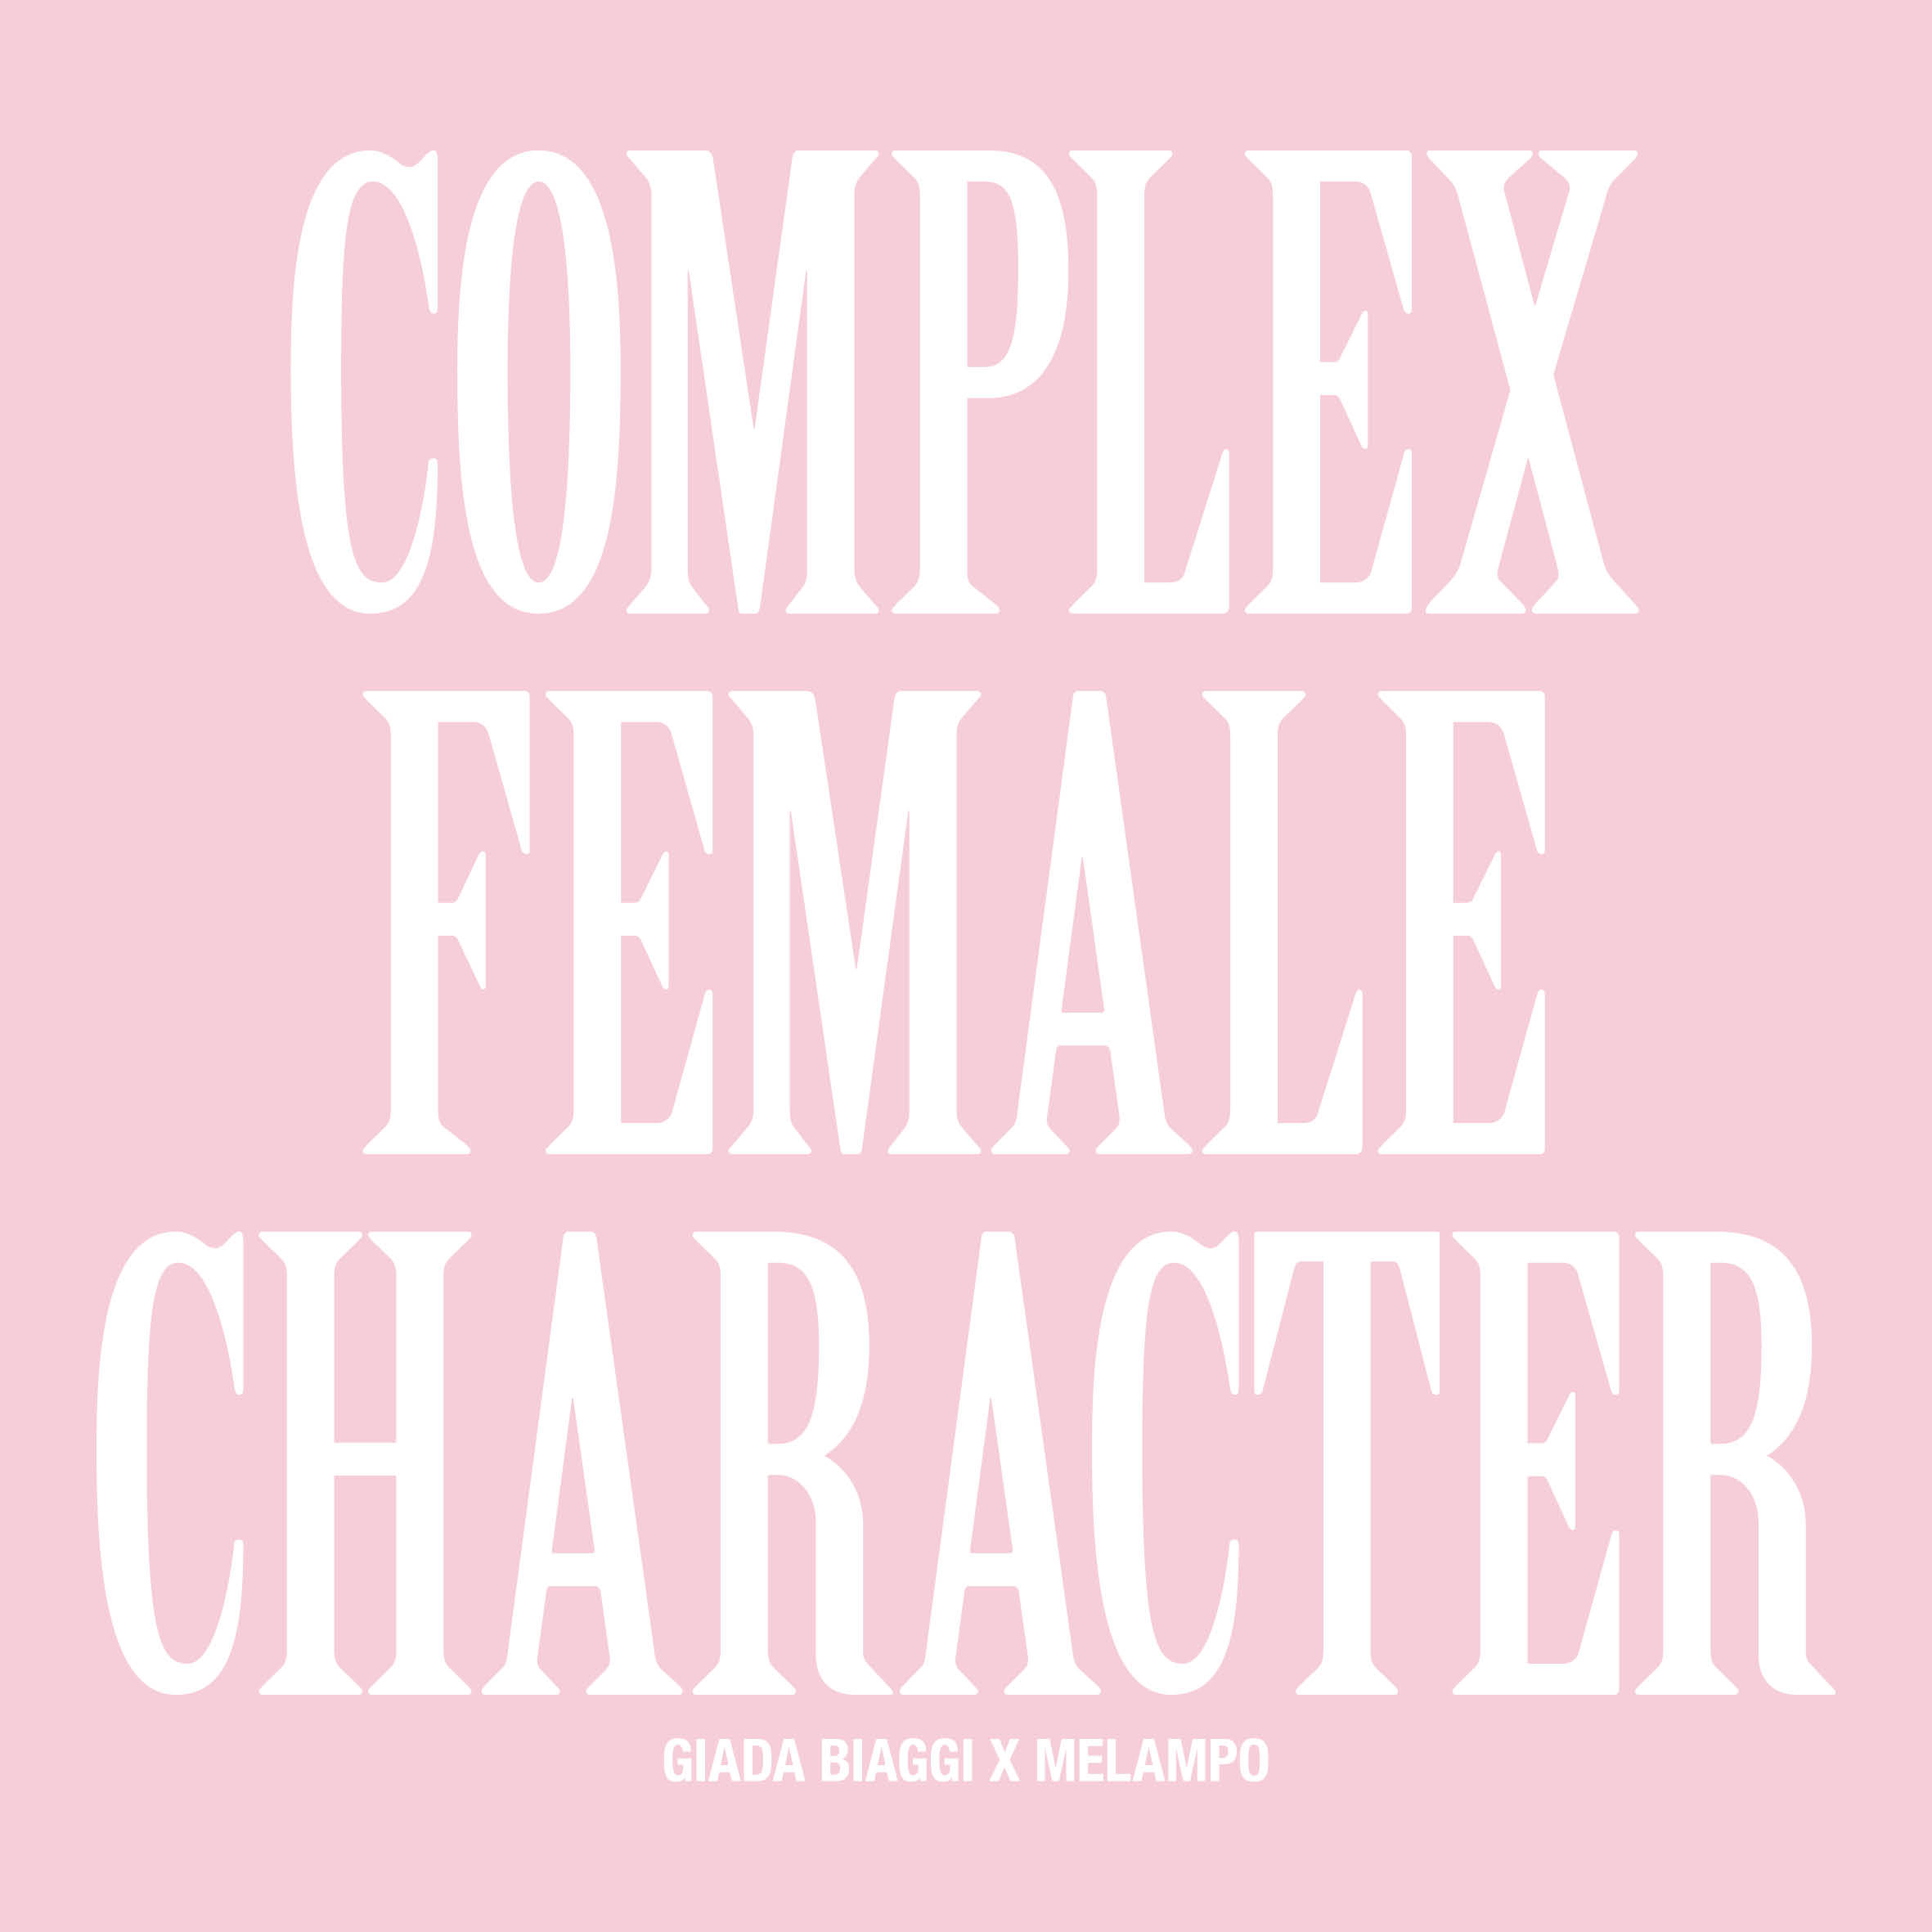 MELAMPO SPECIAL PROJECT COMPLEX FEMALE CHARACTER GIADA BIAGGI TEXT